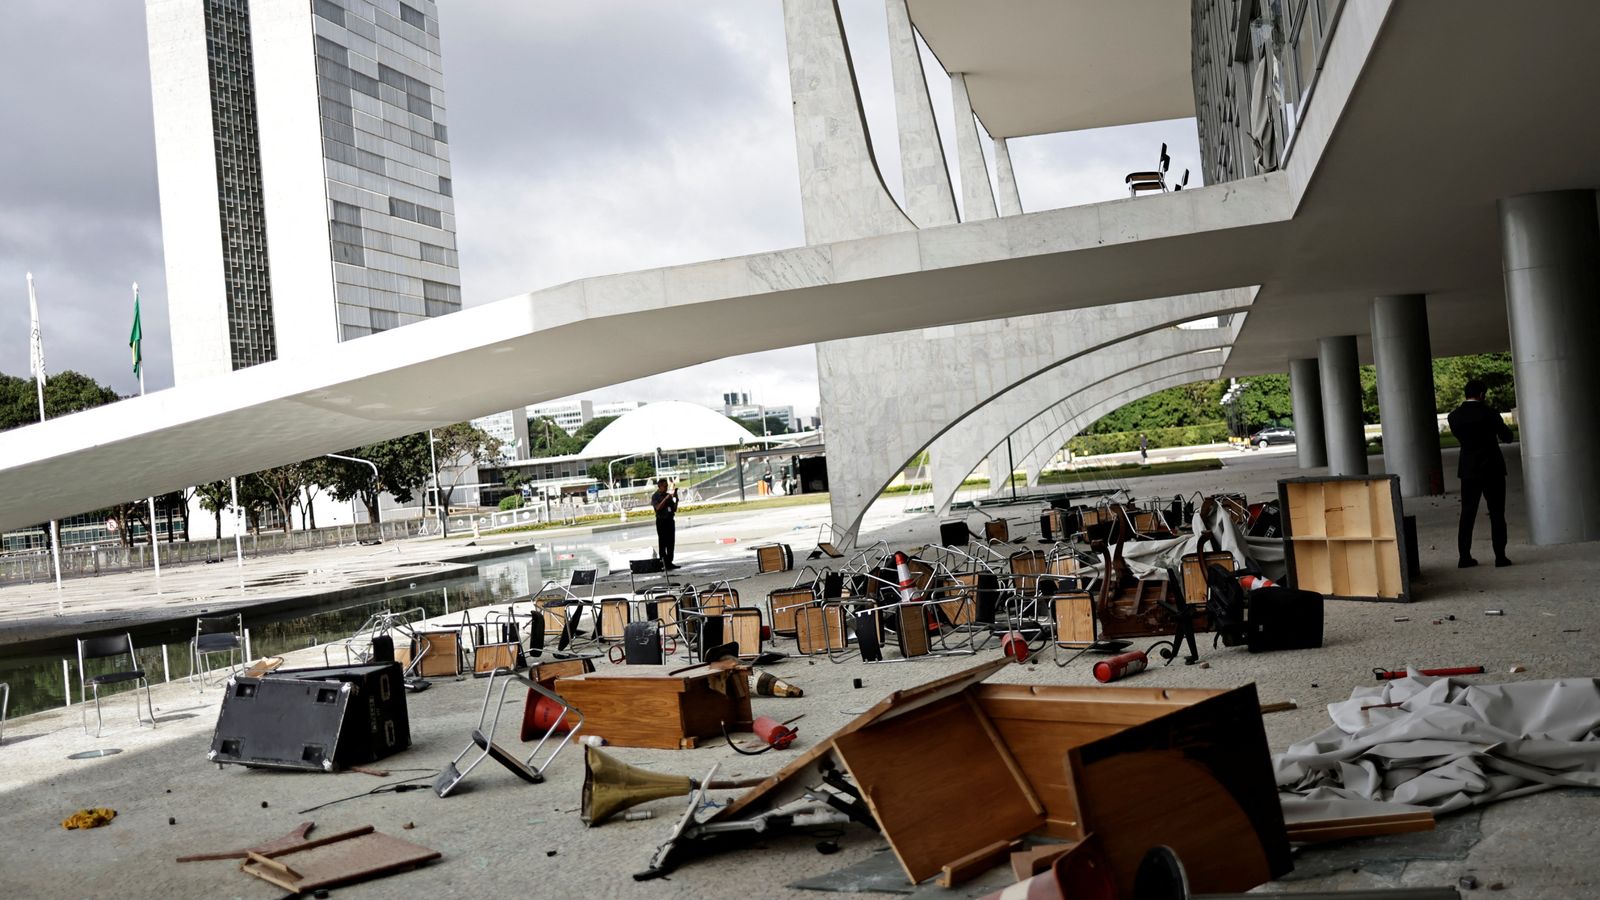 Magnificent buildings in Brazil are pockmarked by rioting - amid fears the unrest may not be over